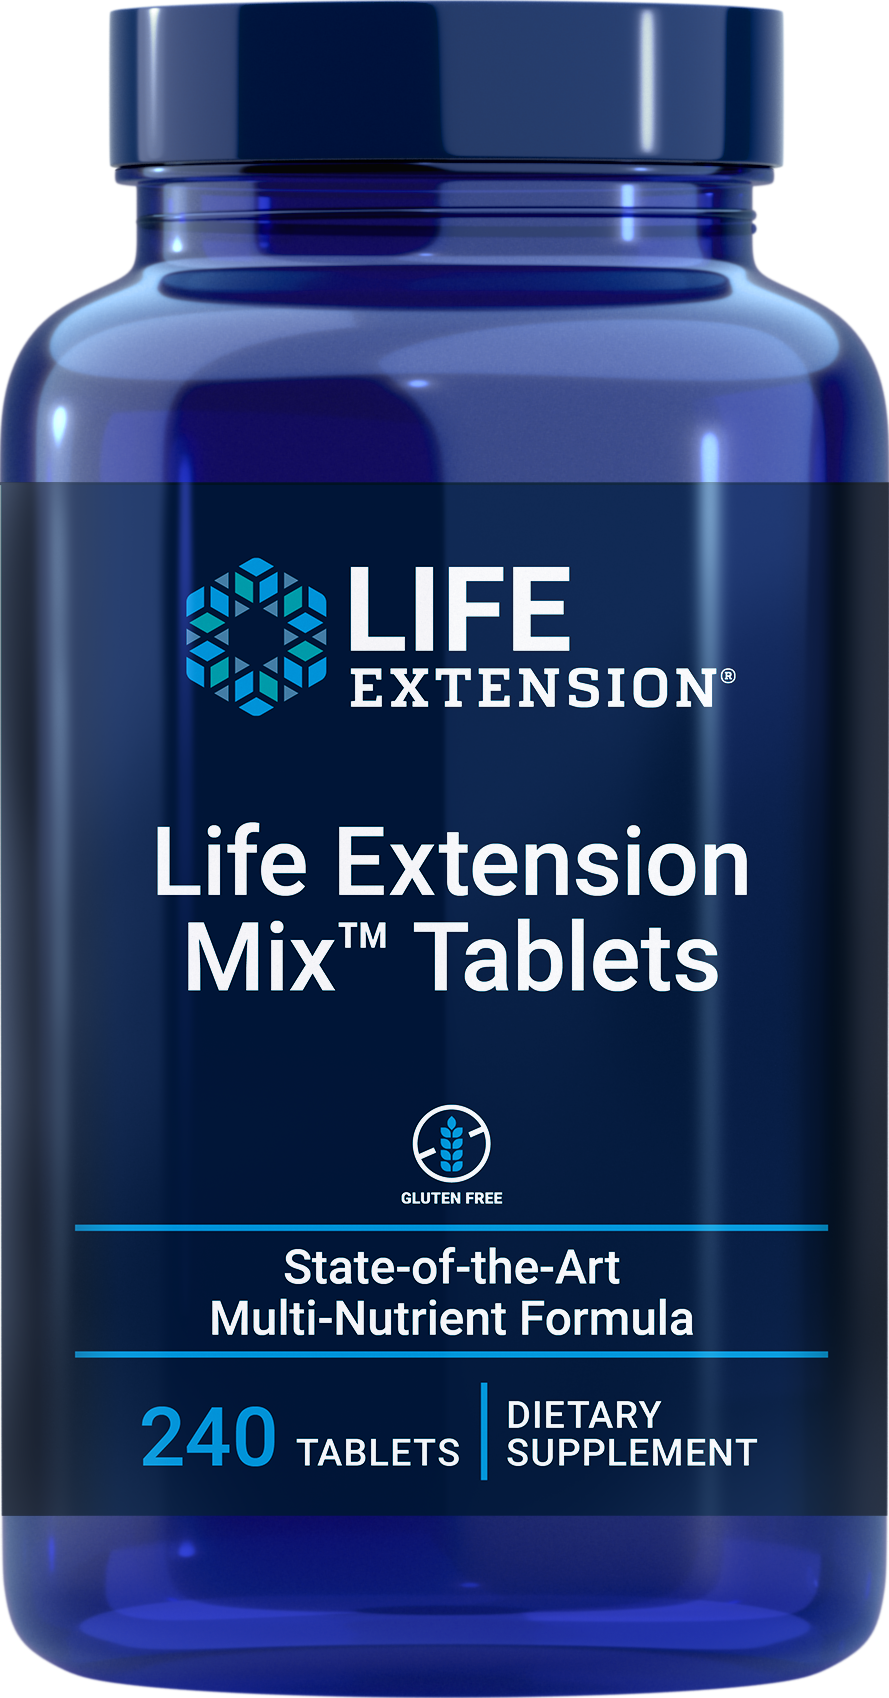 Life Extension Mix™ Tablets